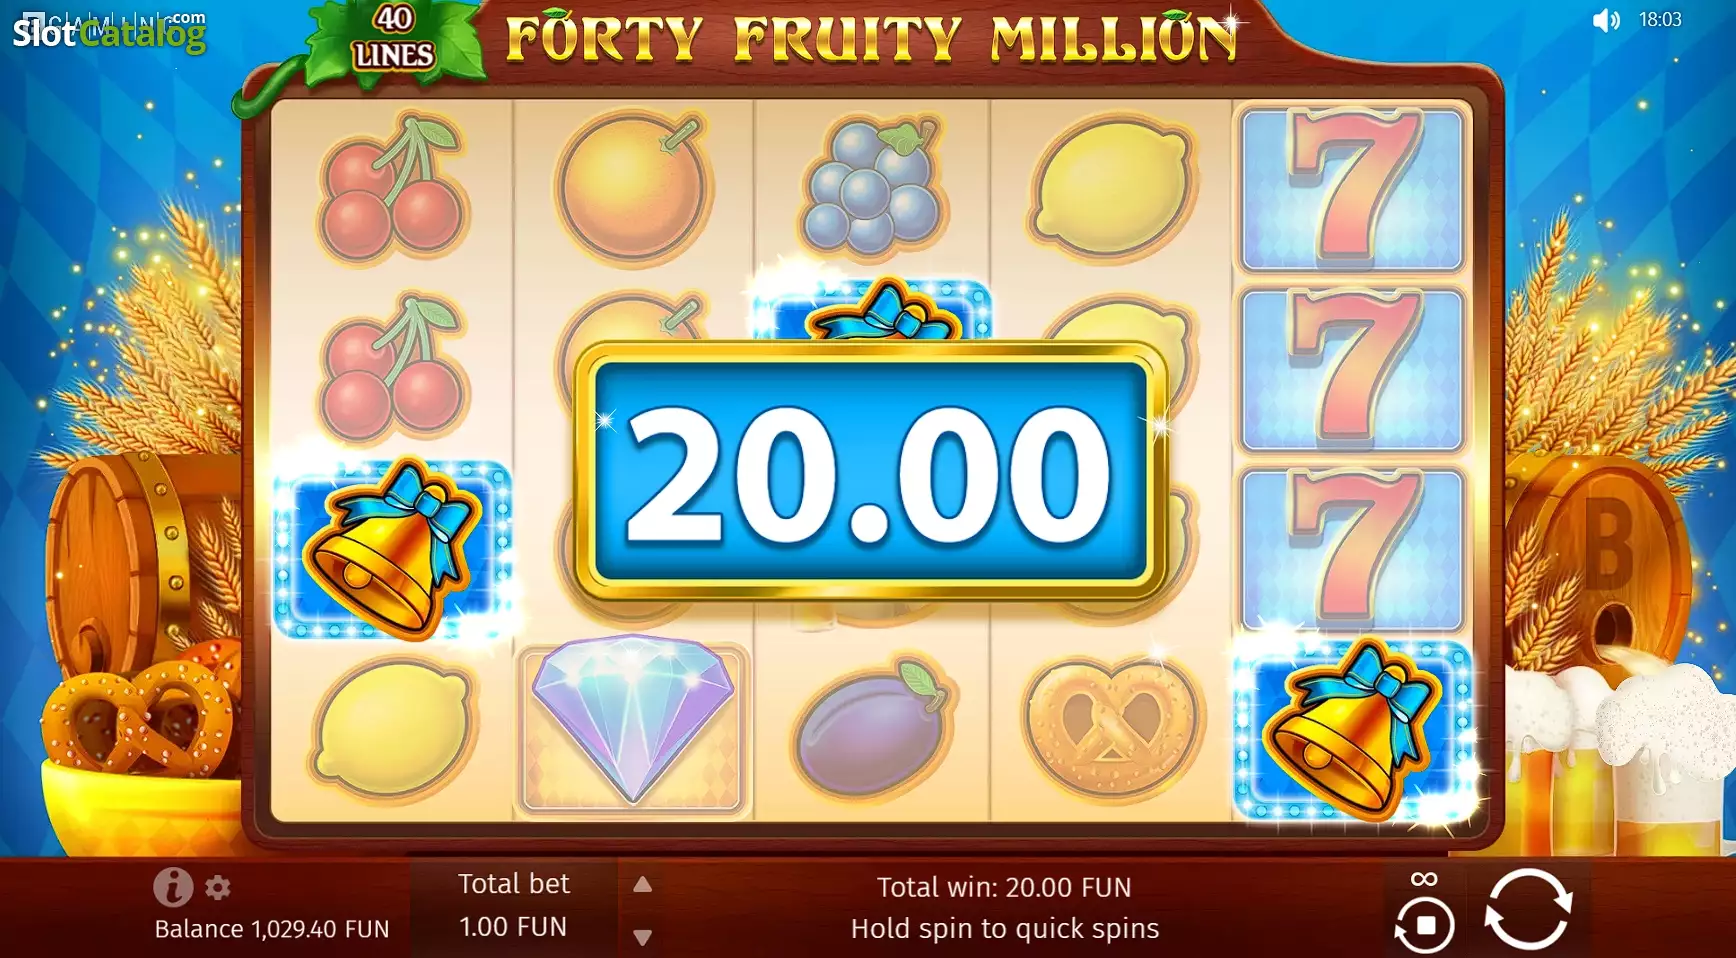 Forty Fruity Million Slot - Free Demo & Game Review